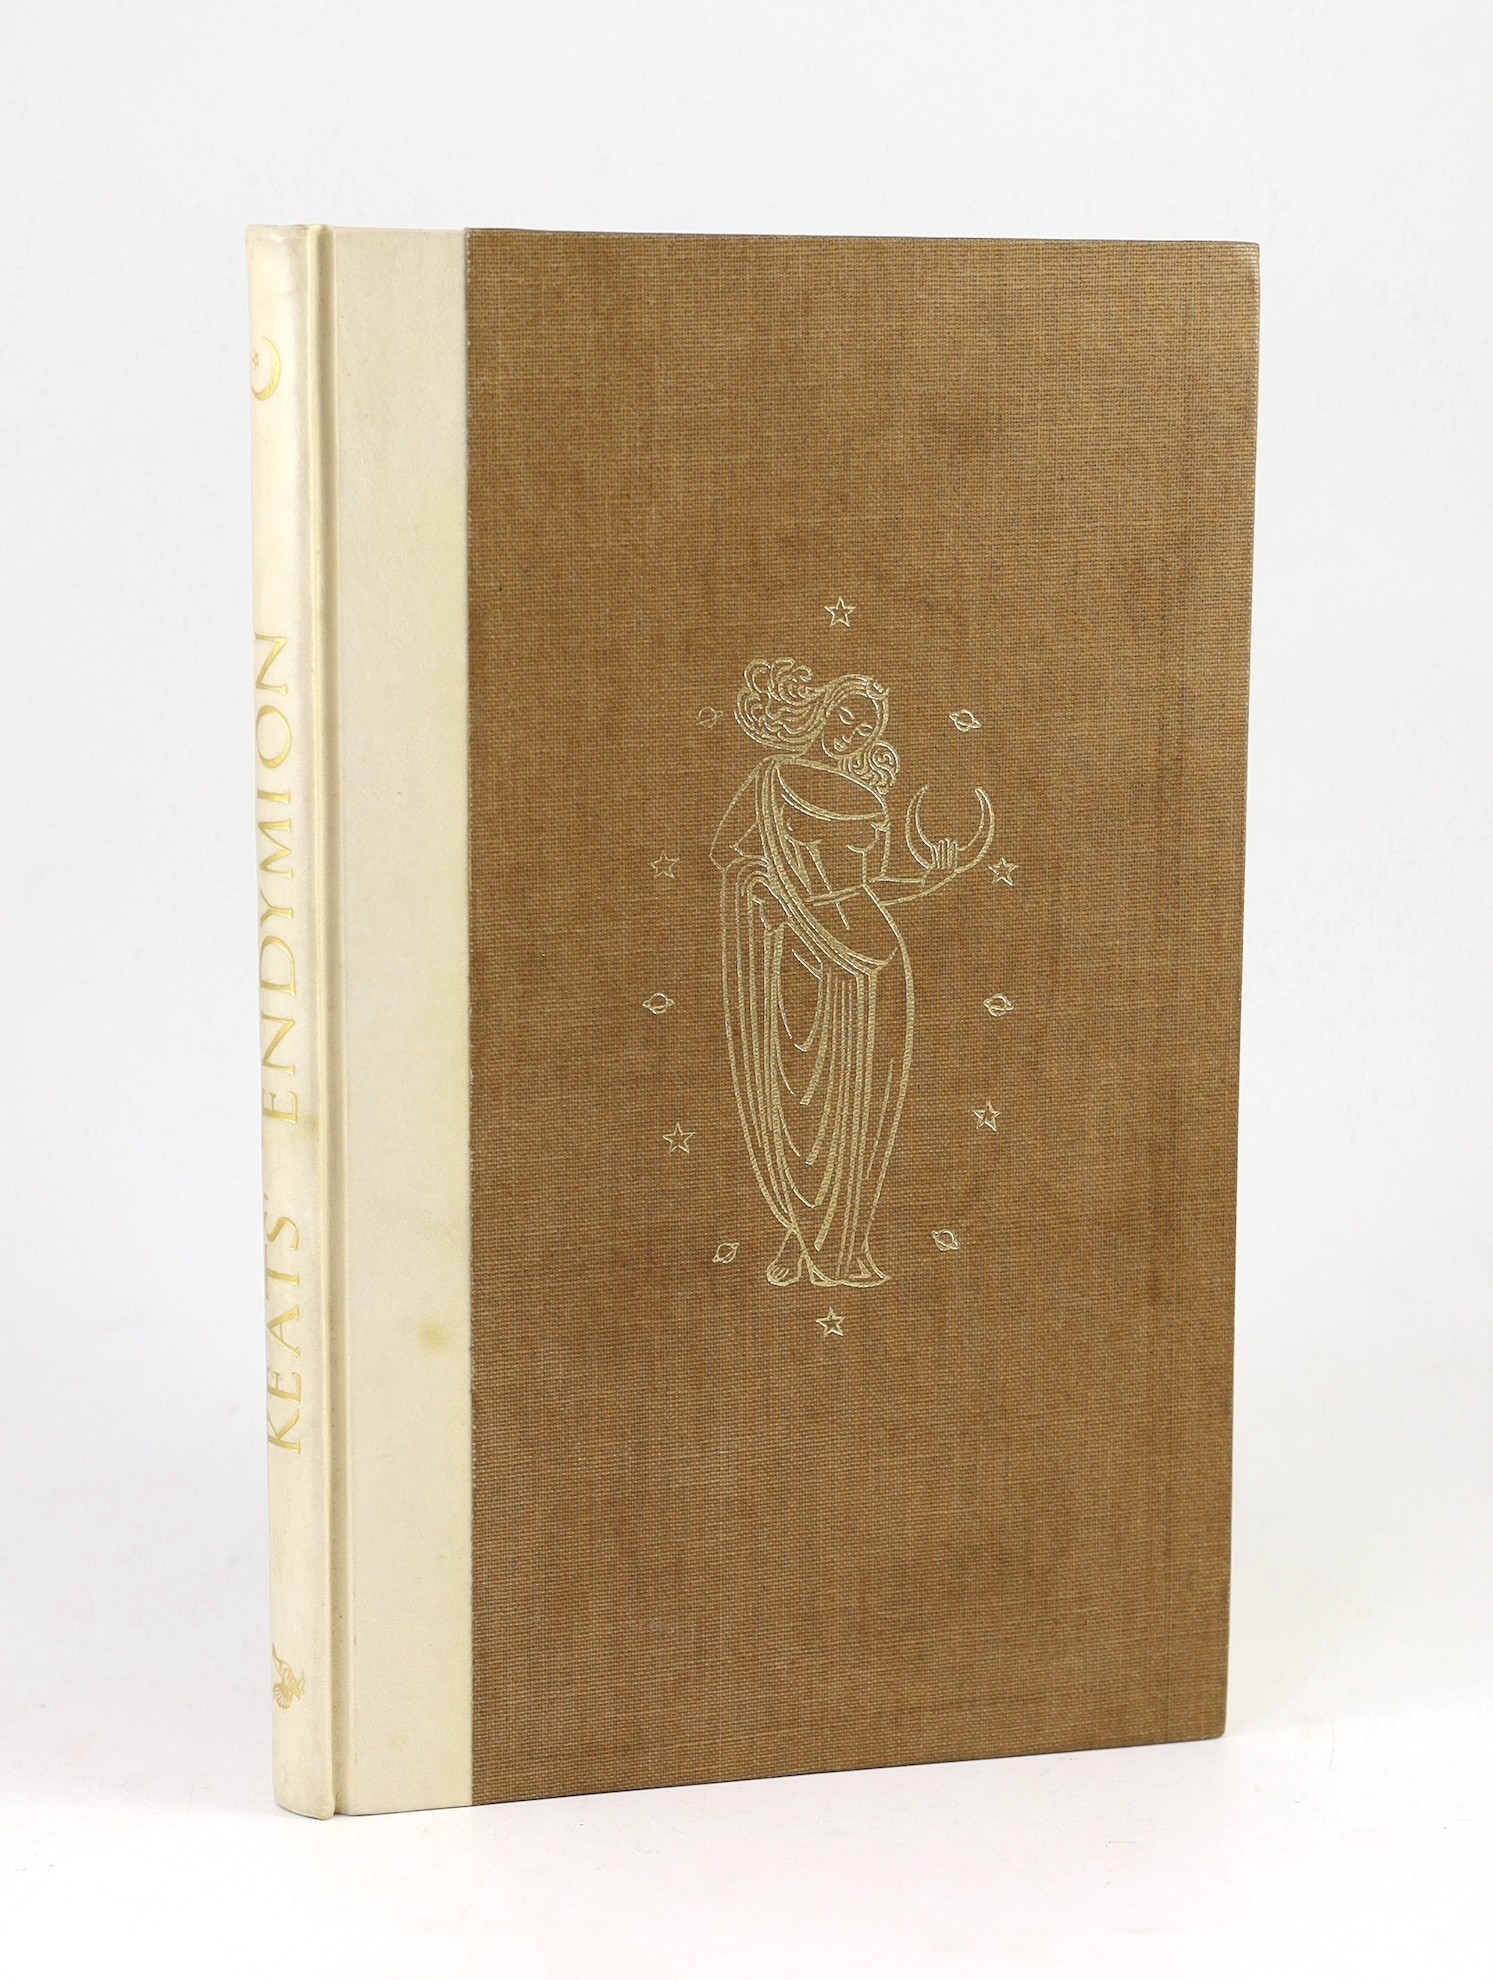 Golden Cockerel Press - Keats, John - Endymion. A Poetic Romance, one of 500, illustrated by John Buckland-Wright, 4to, quarter vellum and brown buckram by Sangorski and Sutcliffe, Waltham Saint Lawrence, 1947